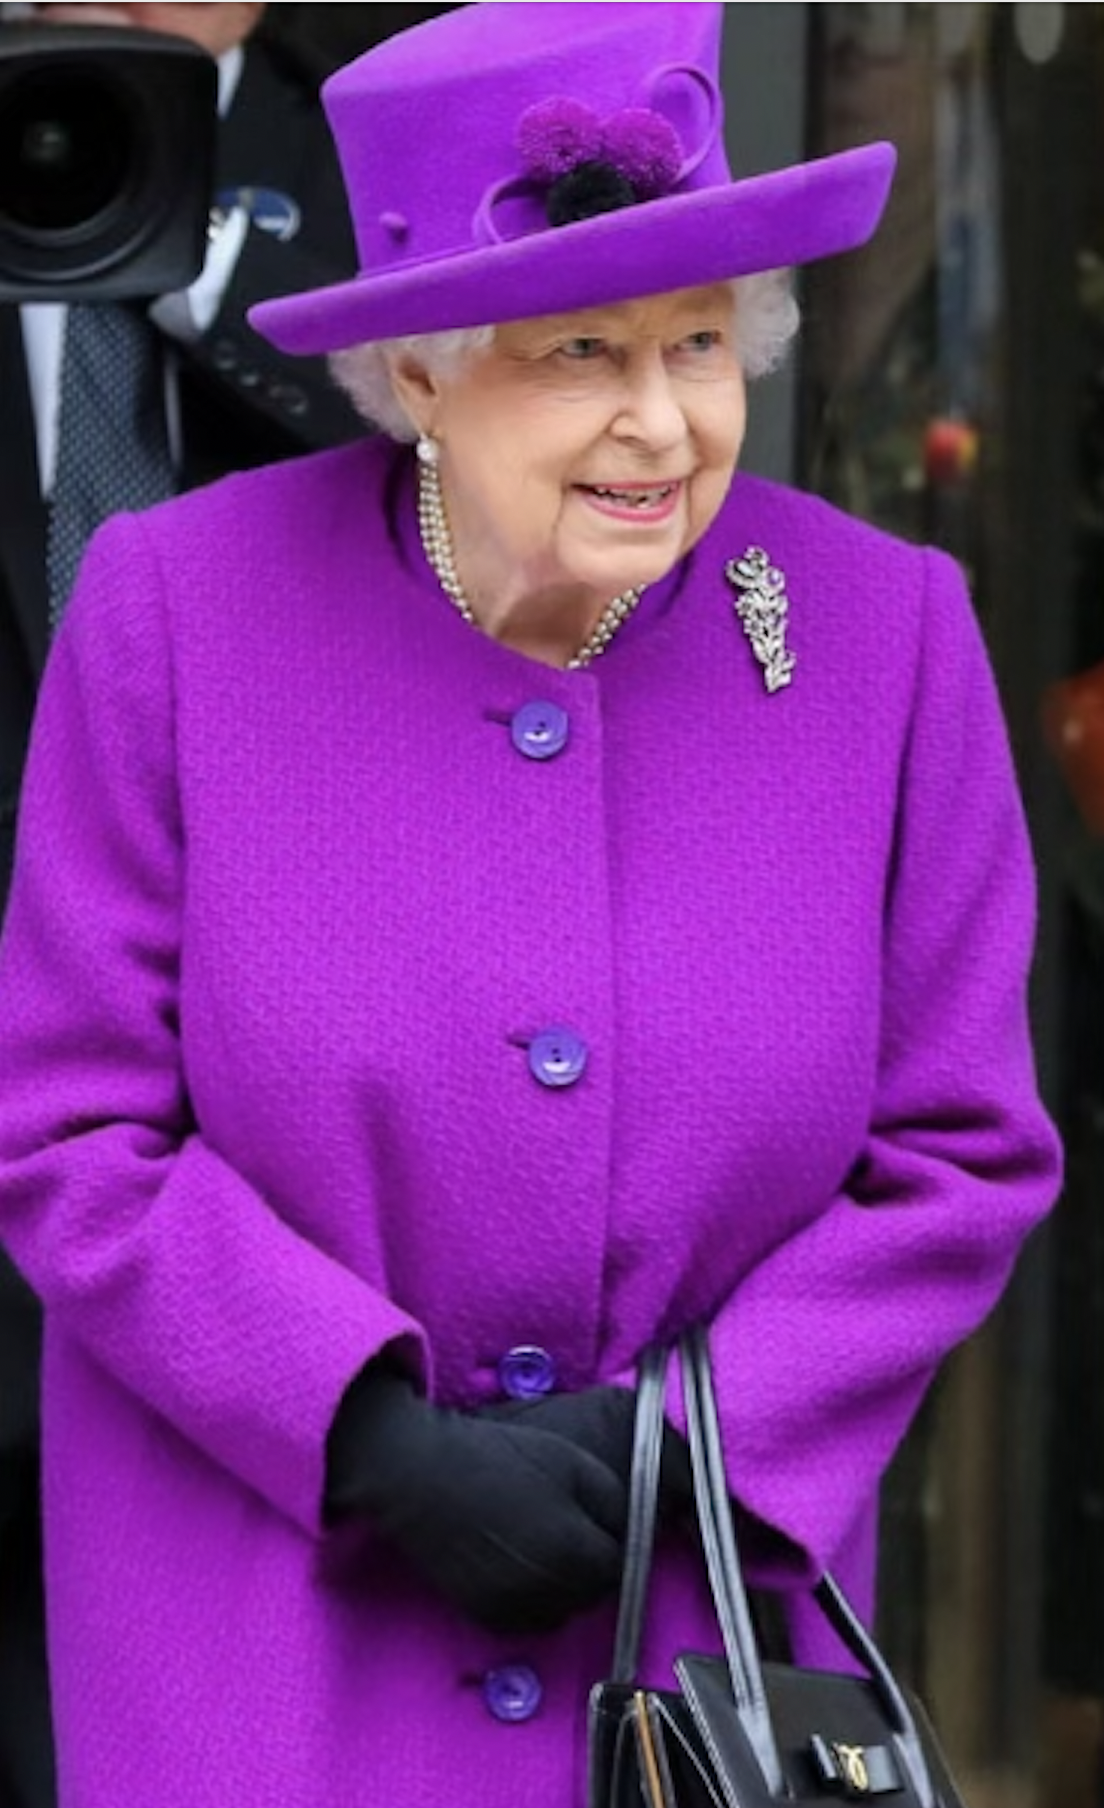 The Queen visited The Royal National ENT and Eastman Dental Hospital in London in February 2020